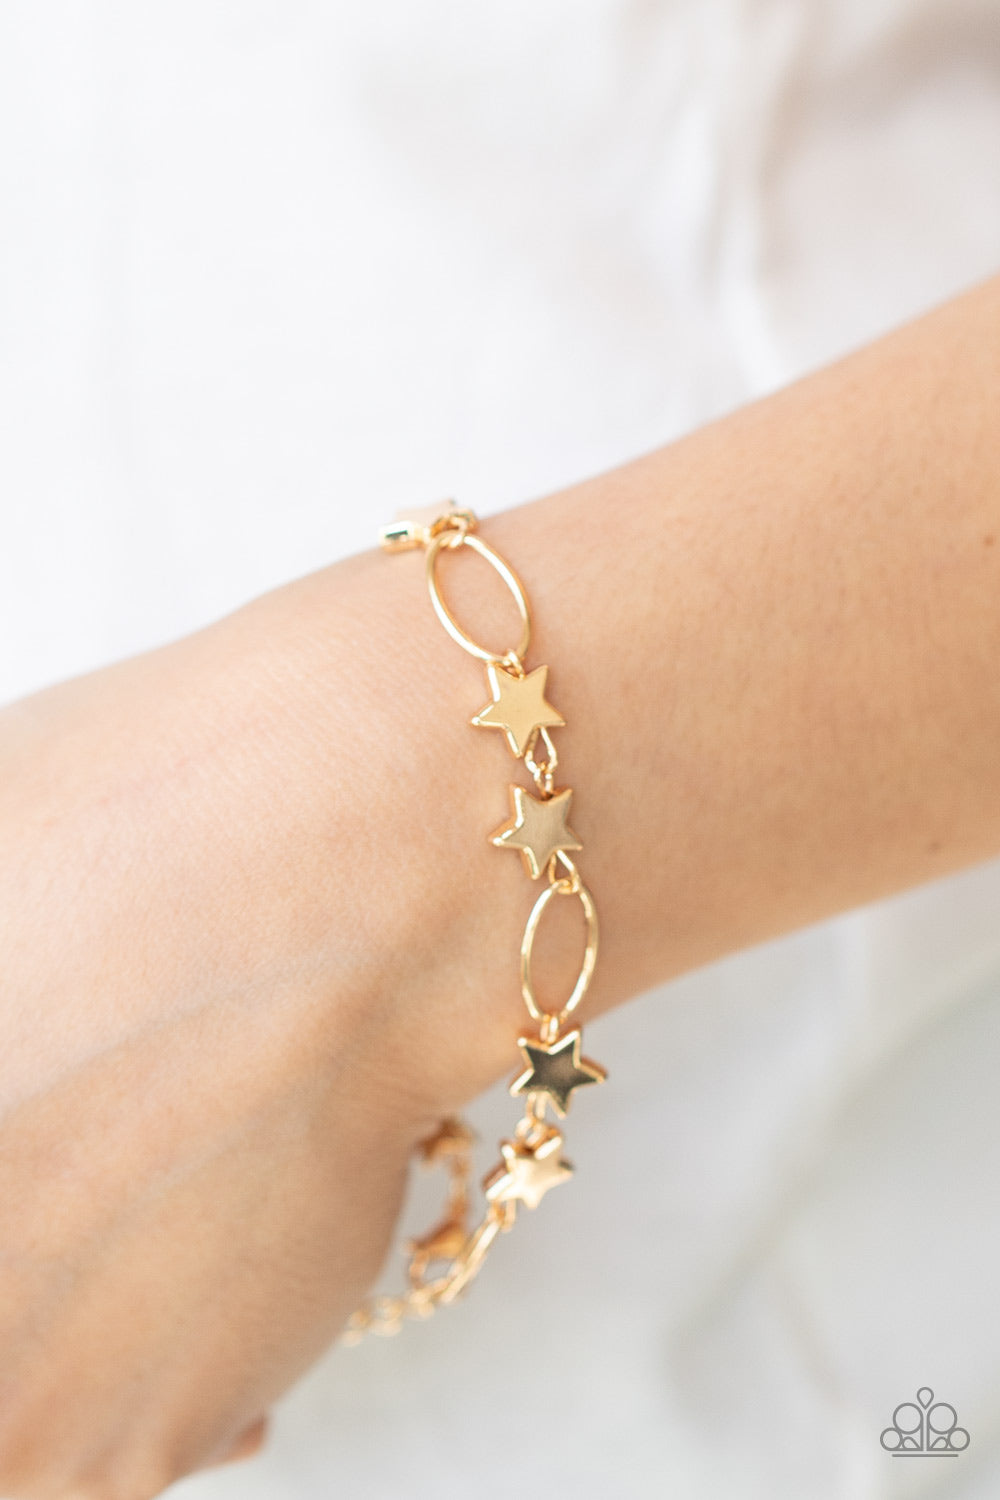 Stars and Sparks Gold Bracelet - Paparazzi Accessories  Dainty gold stars and airy gold ovals delicately link around the wrist, creating a stellar 4th of July display. Features an adjustable clasp closure.  All Paparazzi Accessories are lead free and nickel free!  Sold as one individual bracelet.